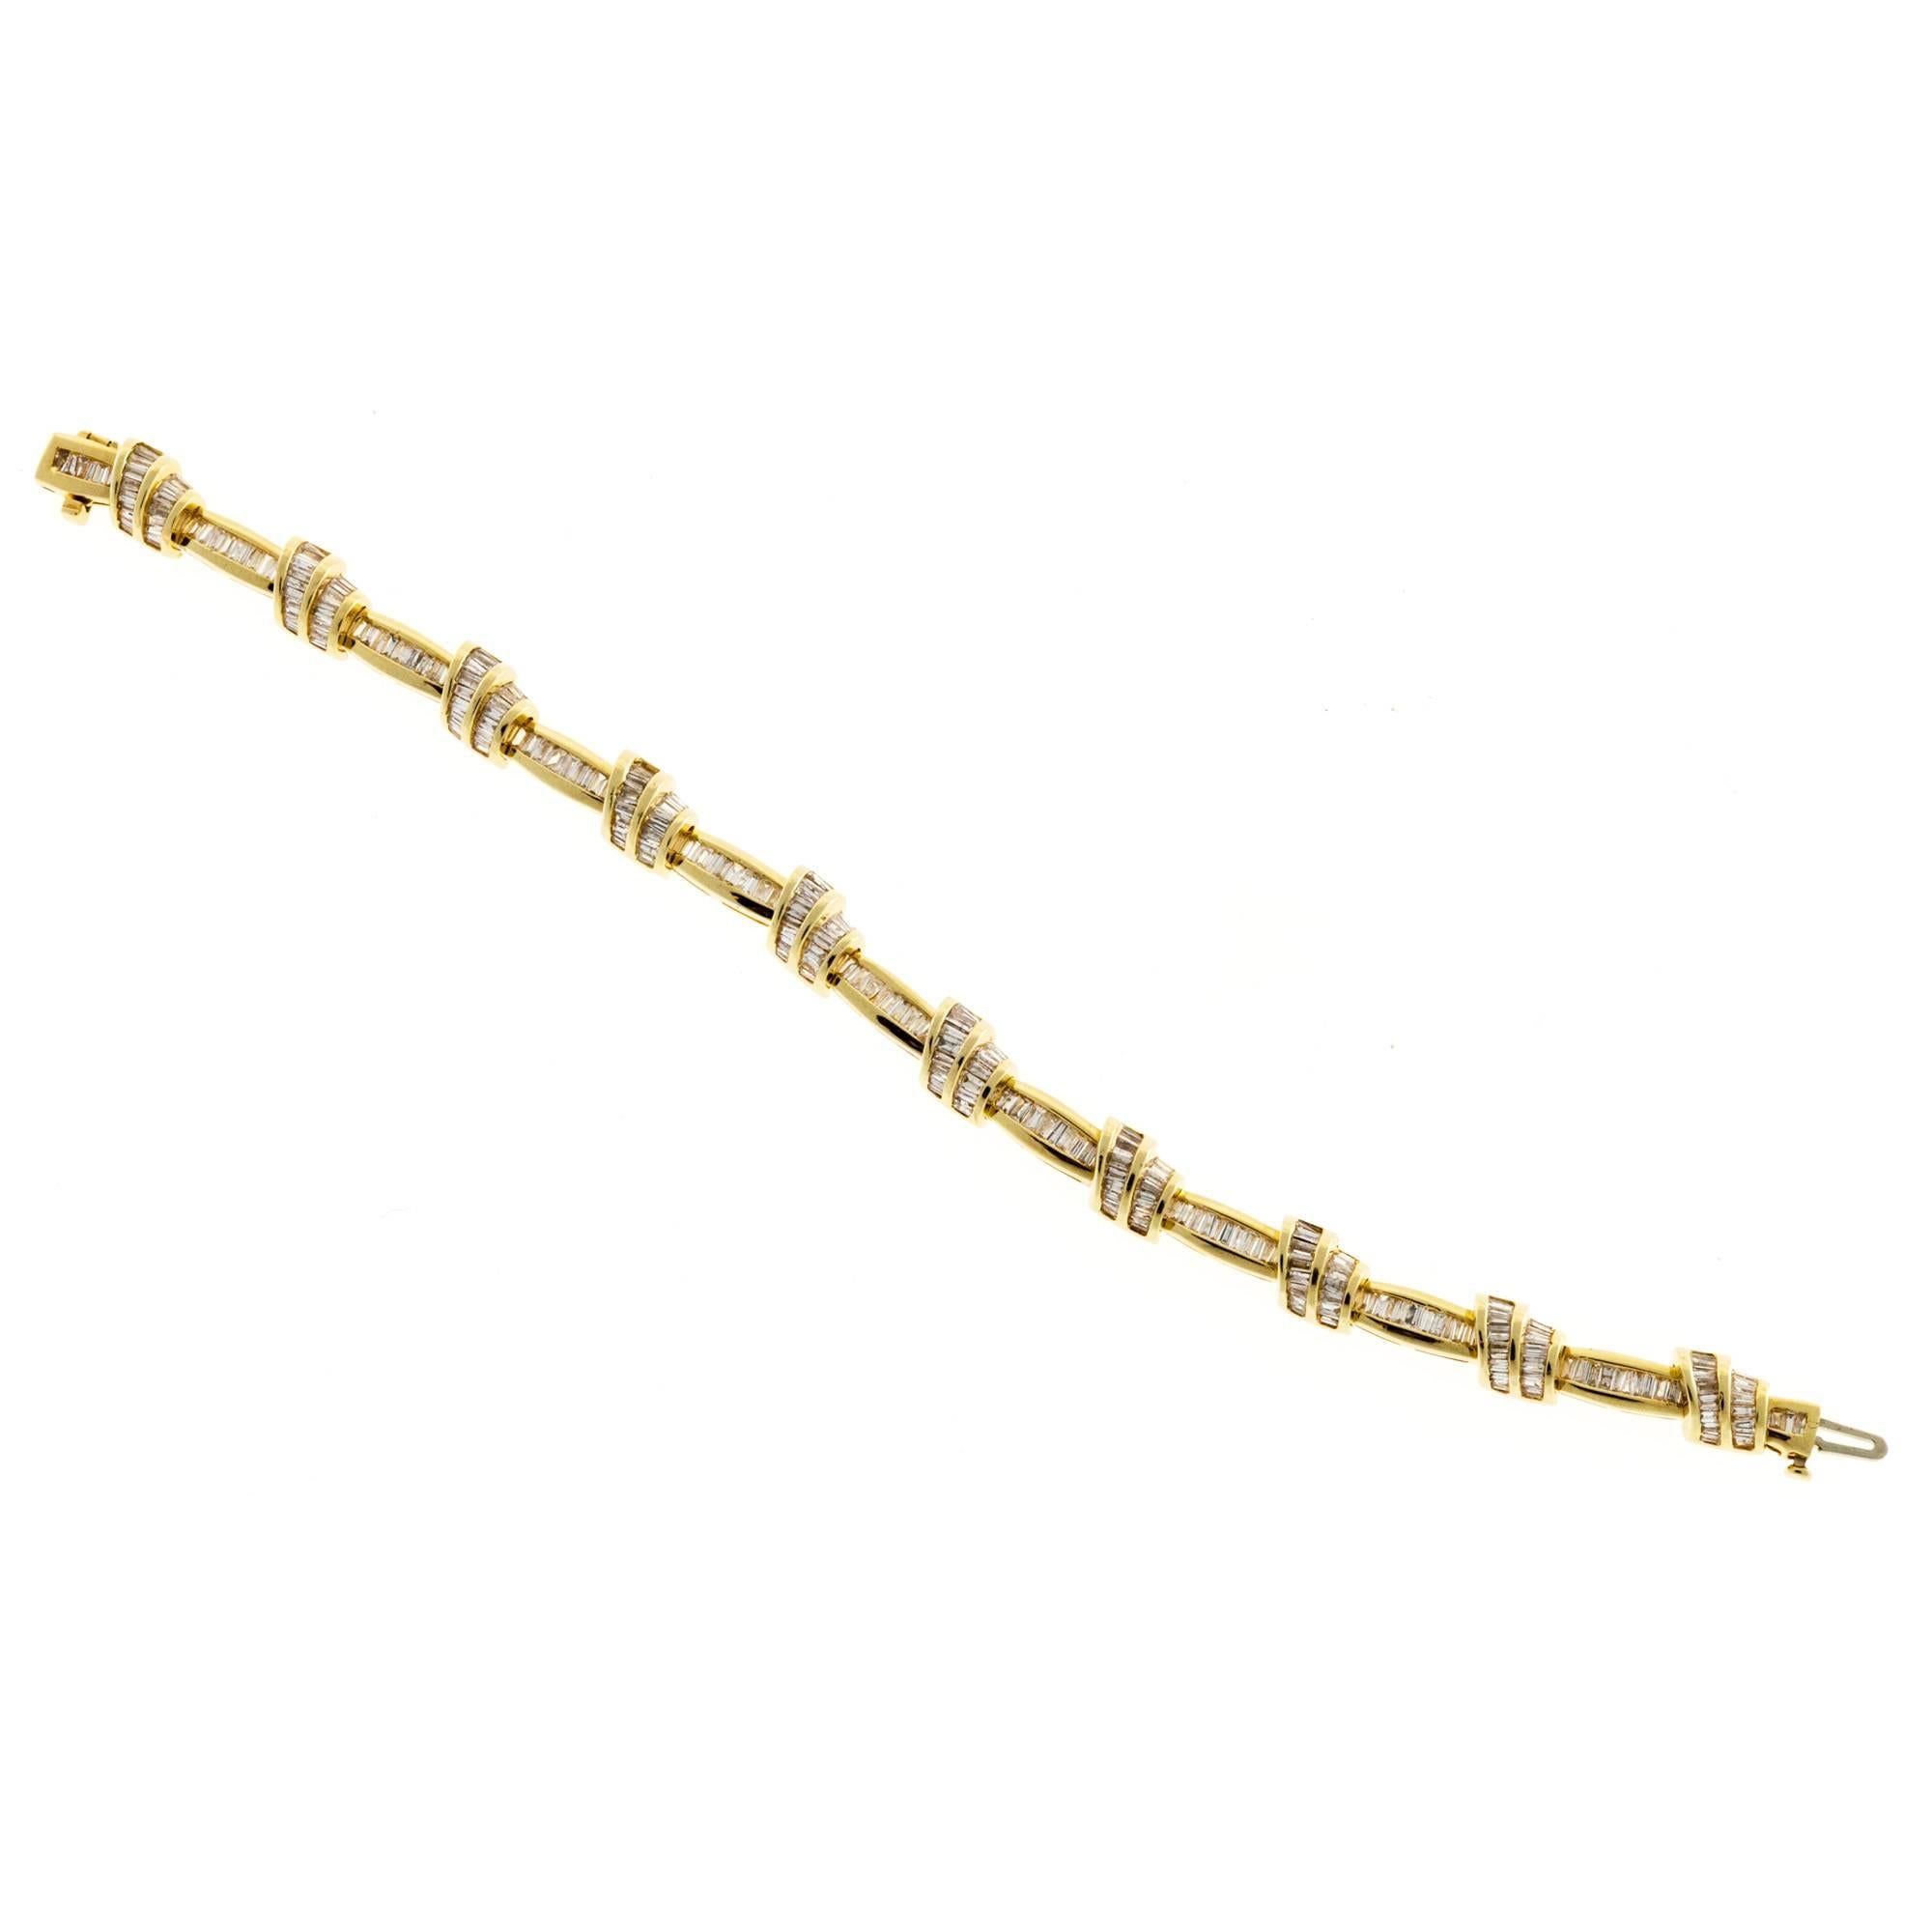 Solid 14k yellow gold channel set bracelet with double swirl alternating with straight sections all set with baguette diamonds end to end. Designer SRT. Set with a total of 279 baguette diamonds, H-I and VS-SI clarity. There are a few gaps between